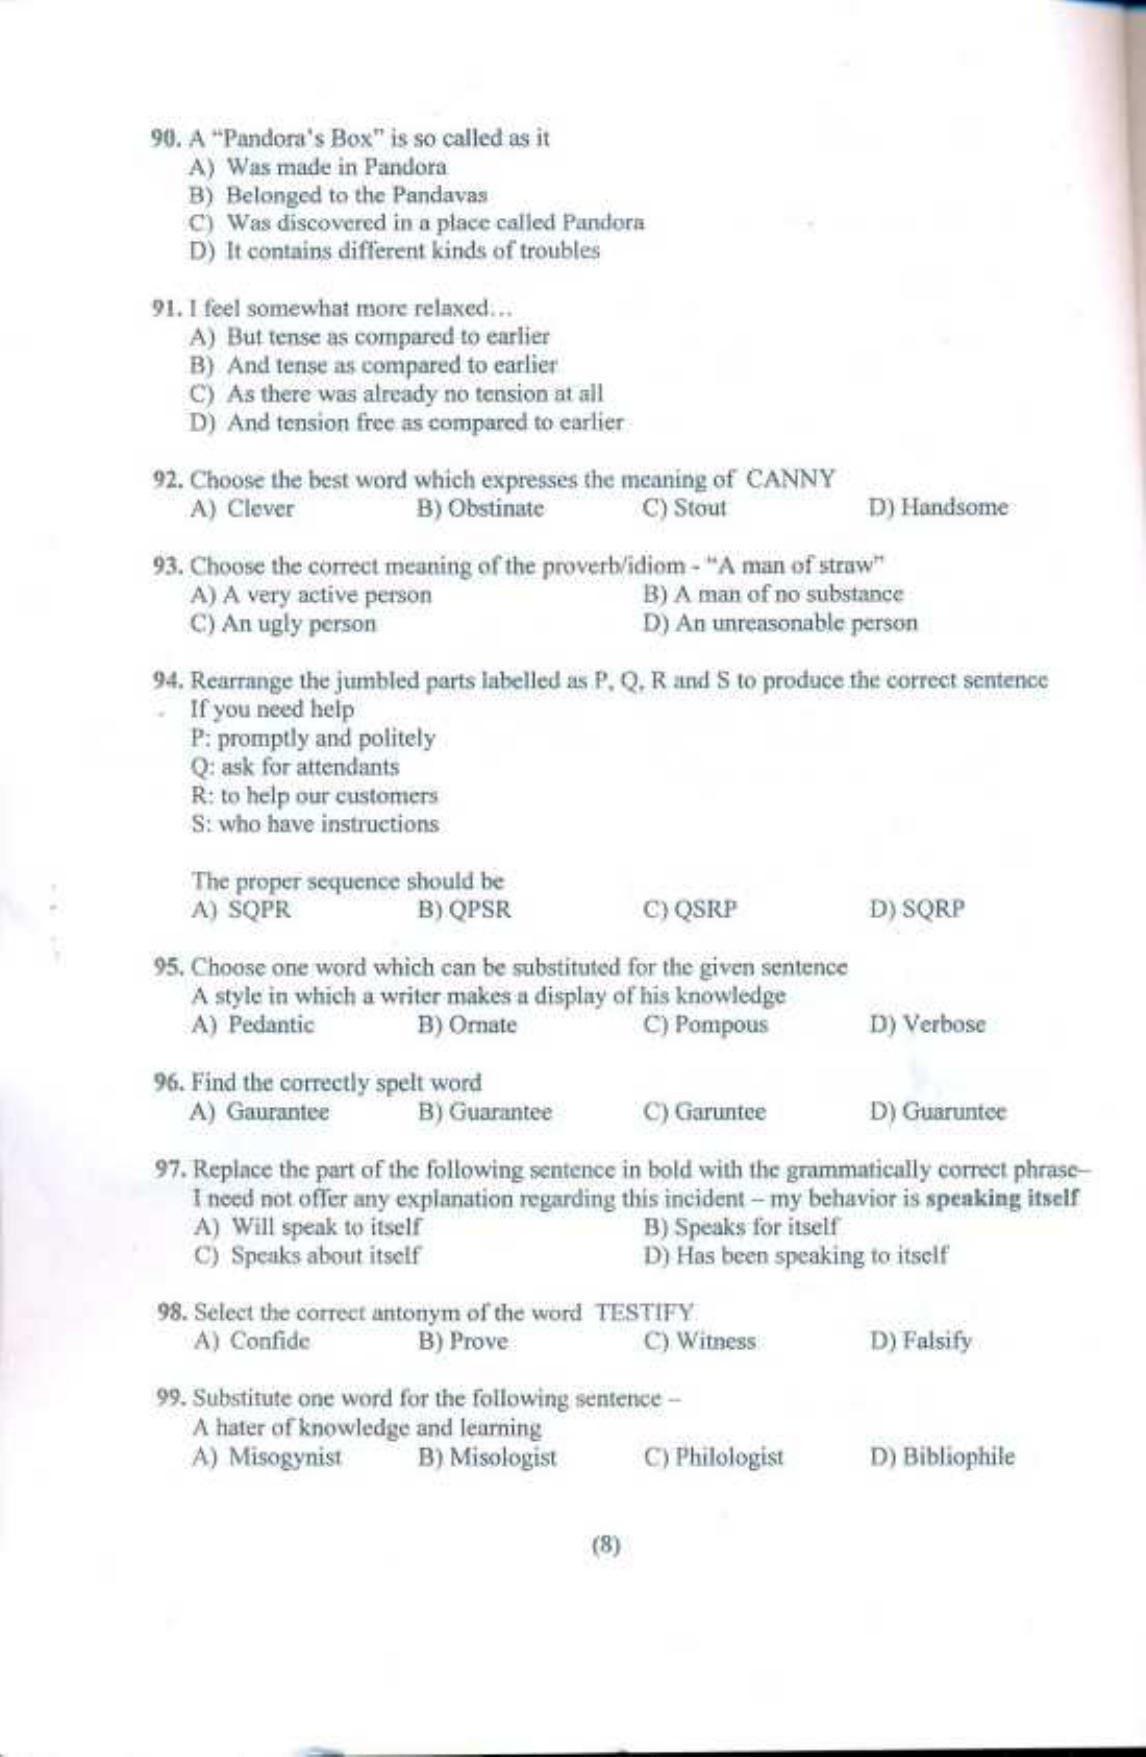 PU LLB 2019 Question Paper - Page 9